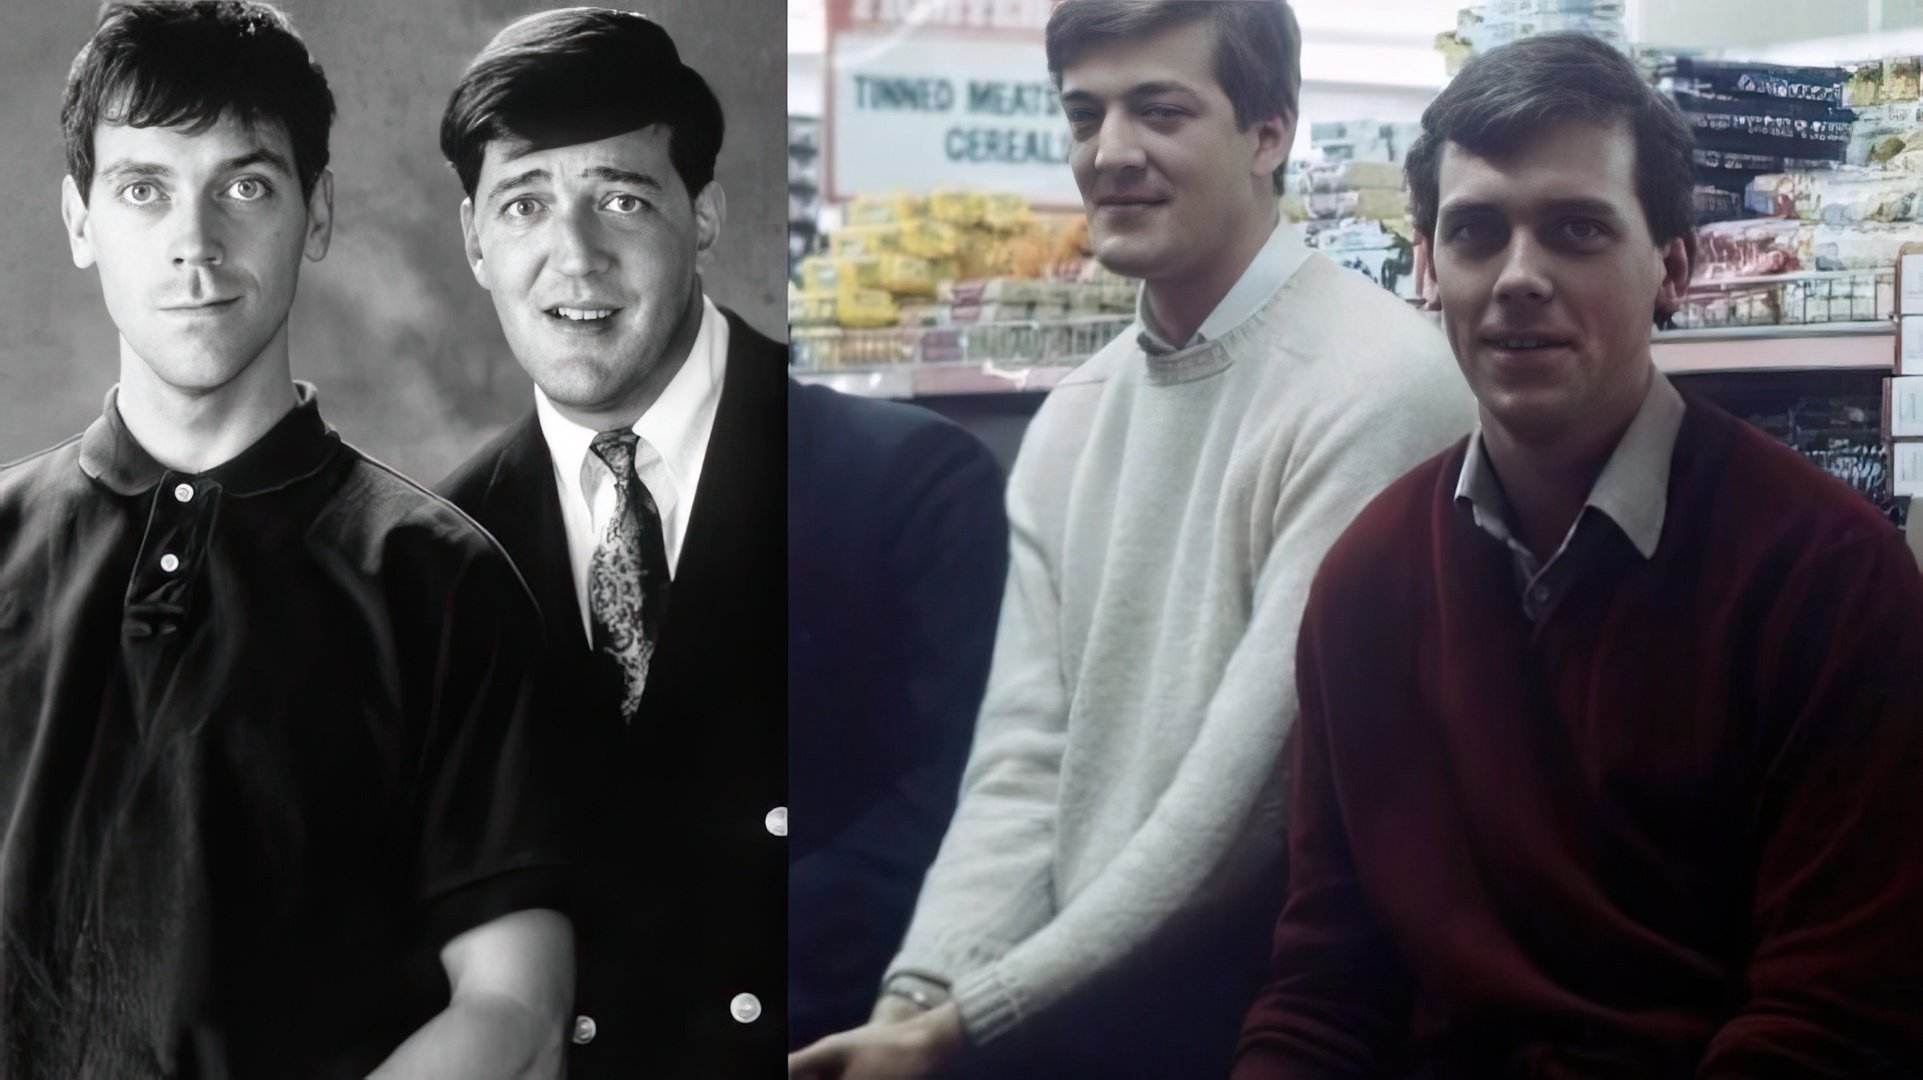 Hugh Laurie and Stephen Fry in their youth